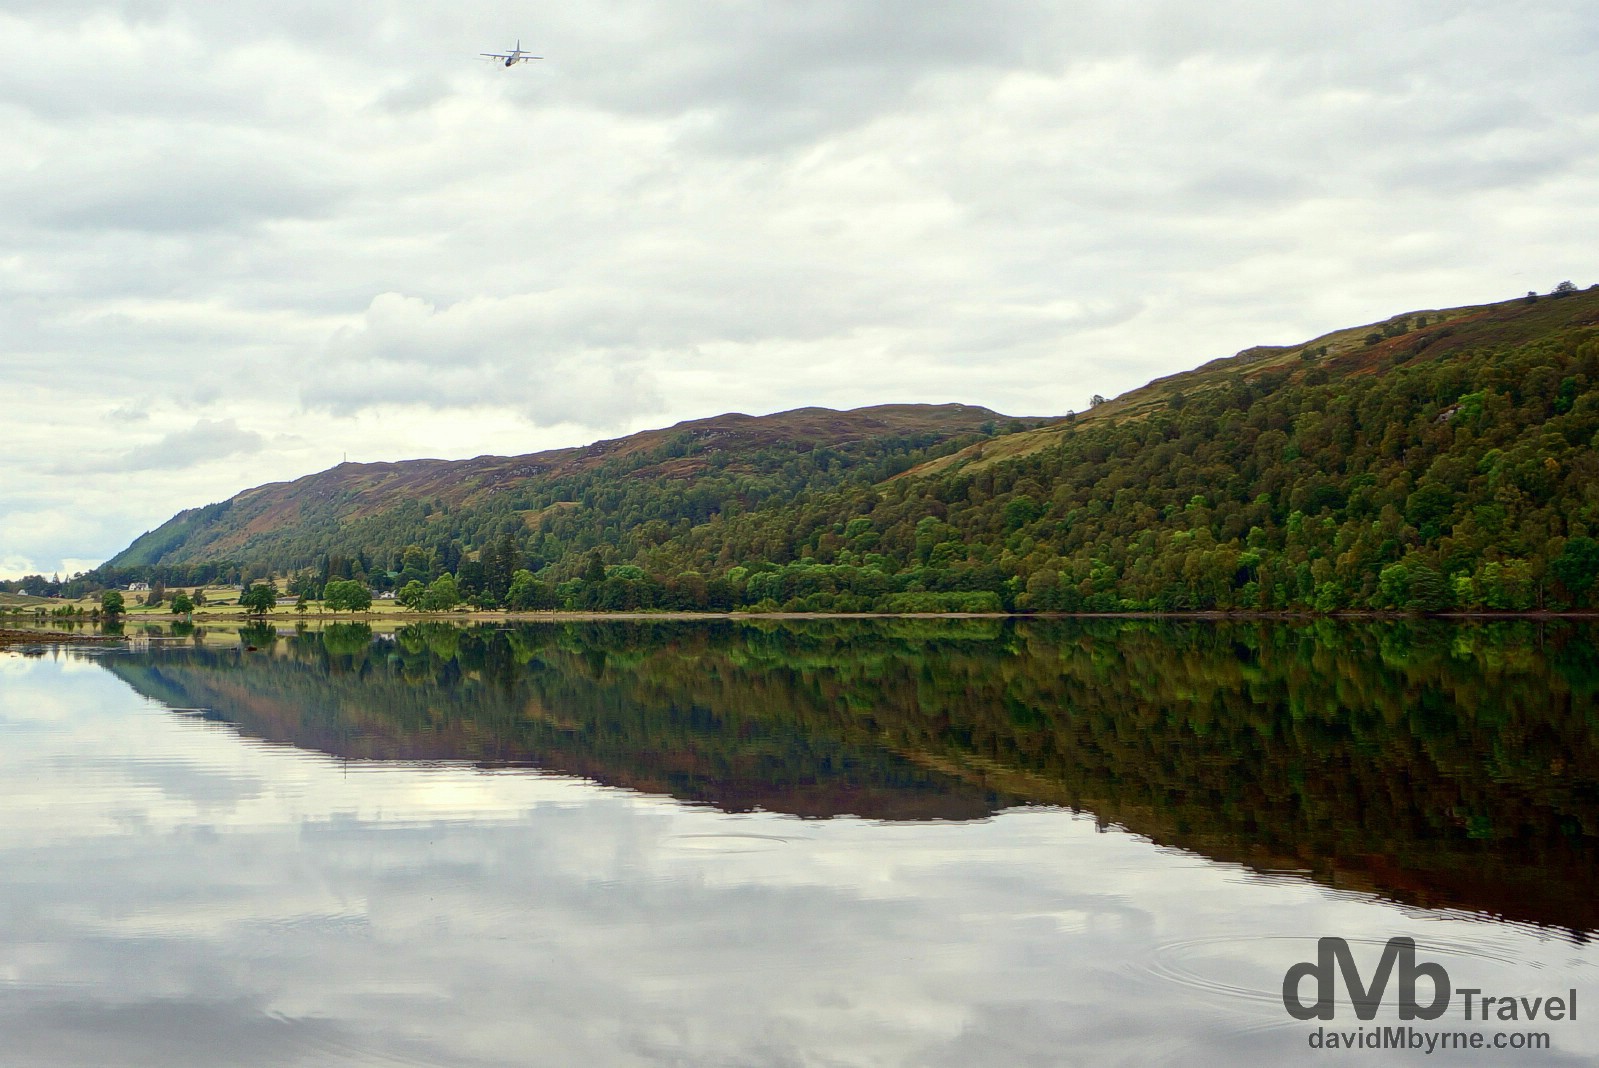 A military cargo plane fly-by over the waters of Loch Oich, Highlands, Scotland. September 16, 2014.